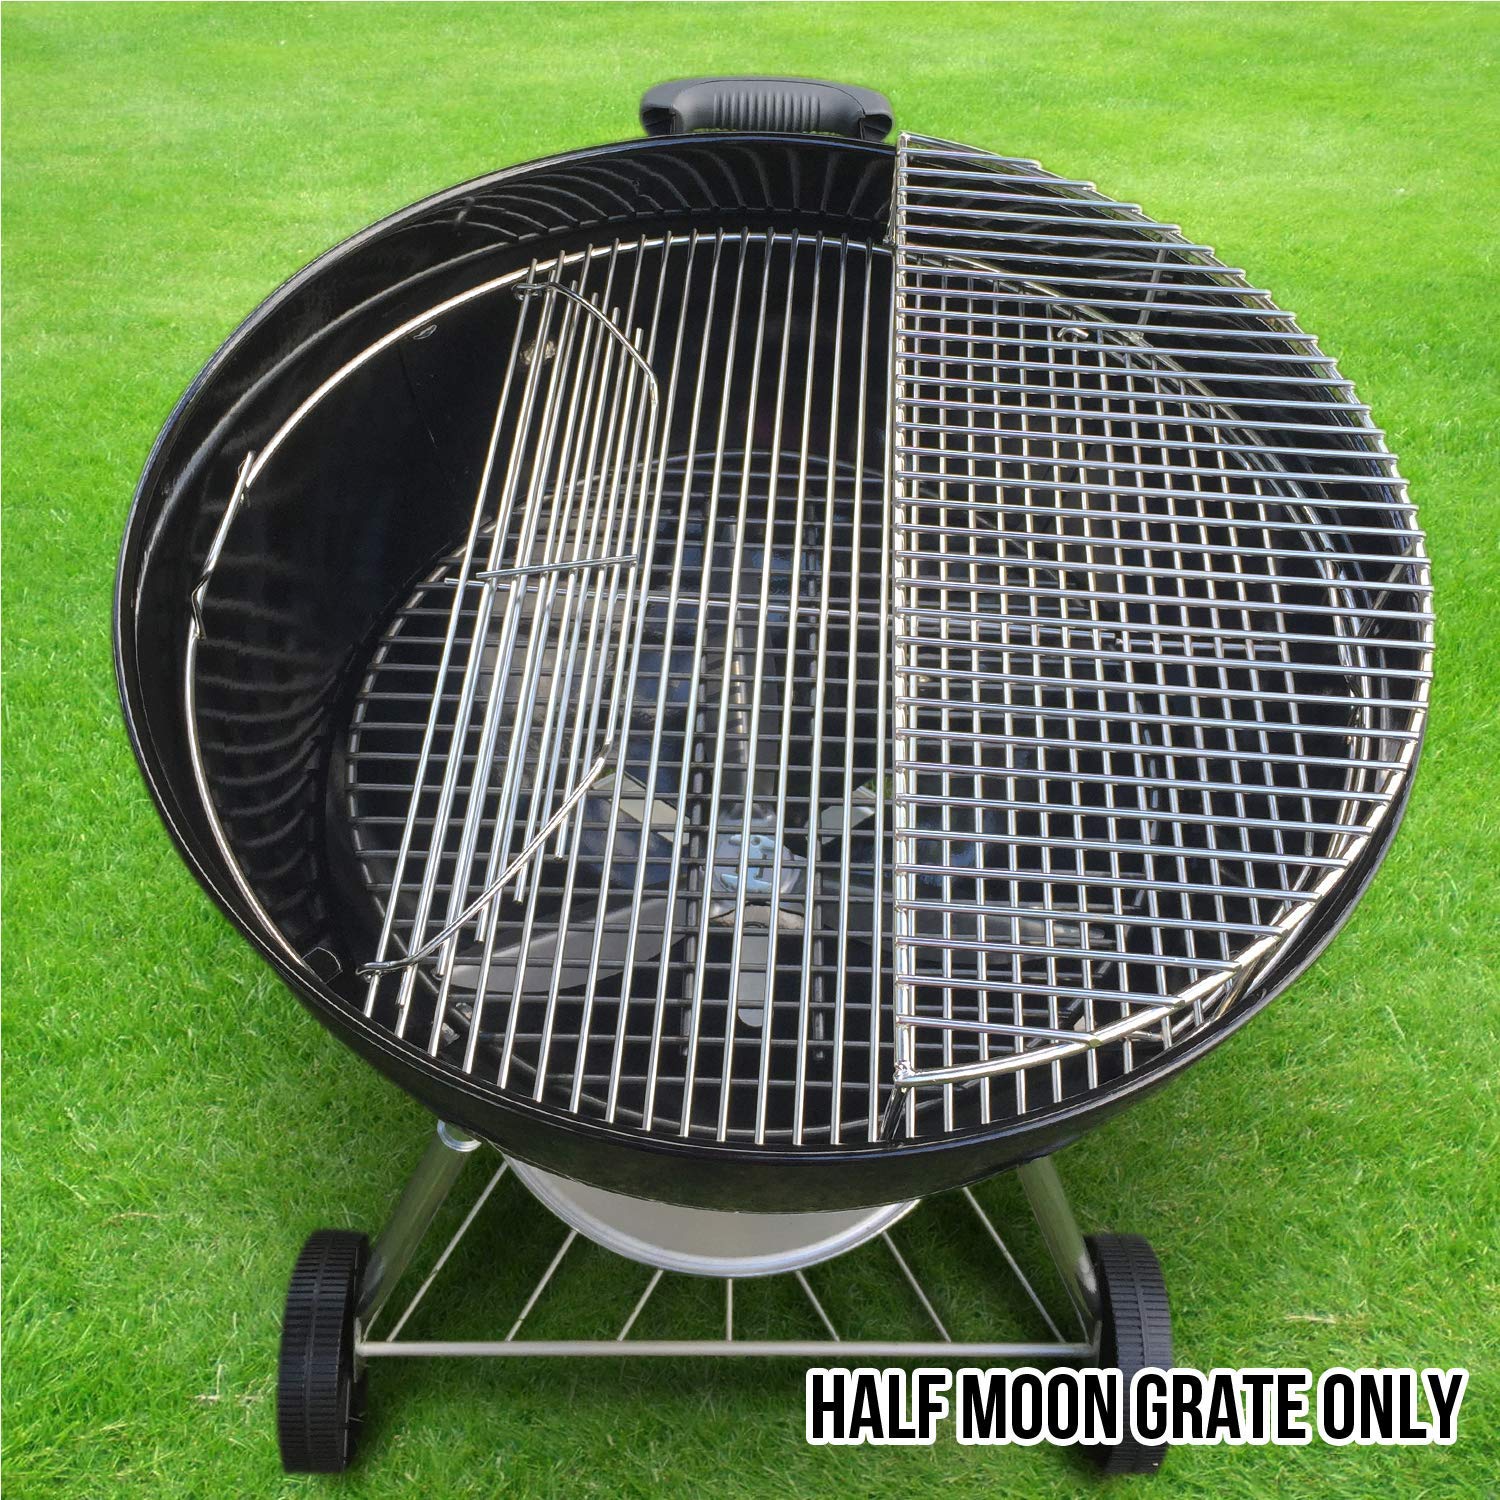 The Original 'Upper Deck' Stainless Steel Grilling Rack/Warming Rack/Smoking Rack/Charcoal Grill Grate- Use with Weber 22 inch Kettle Grill- Charcoal Grilling Accessories and Grill Tools Grill Rack? - image 3 of 6